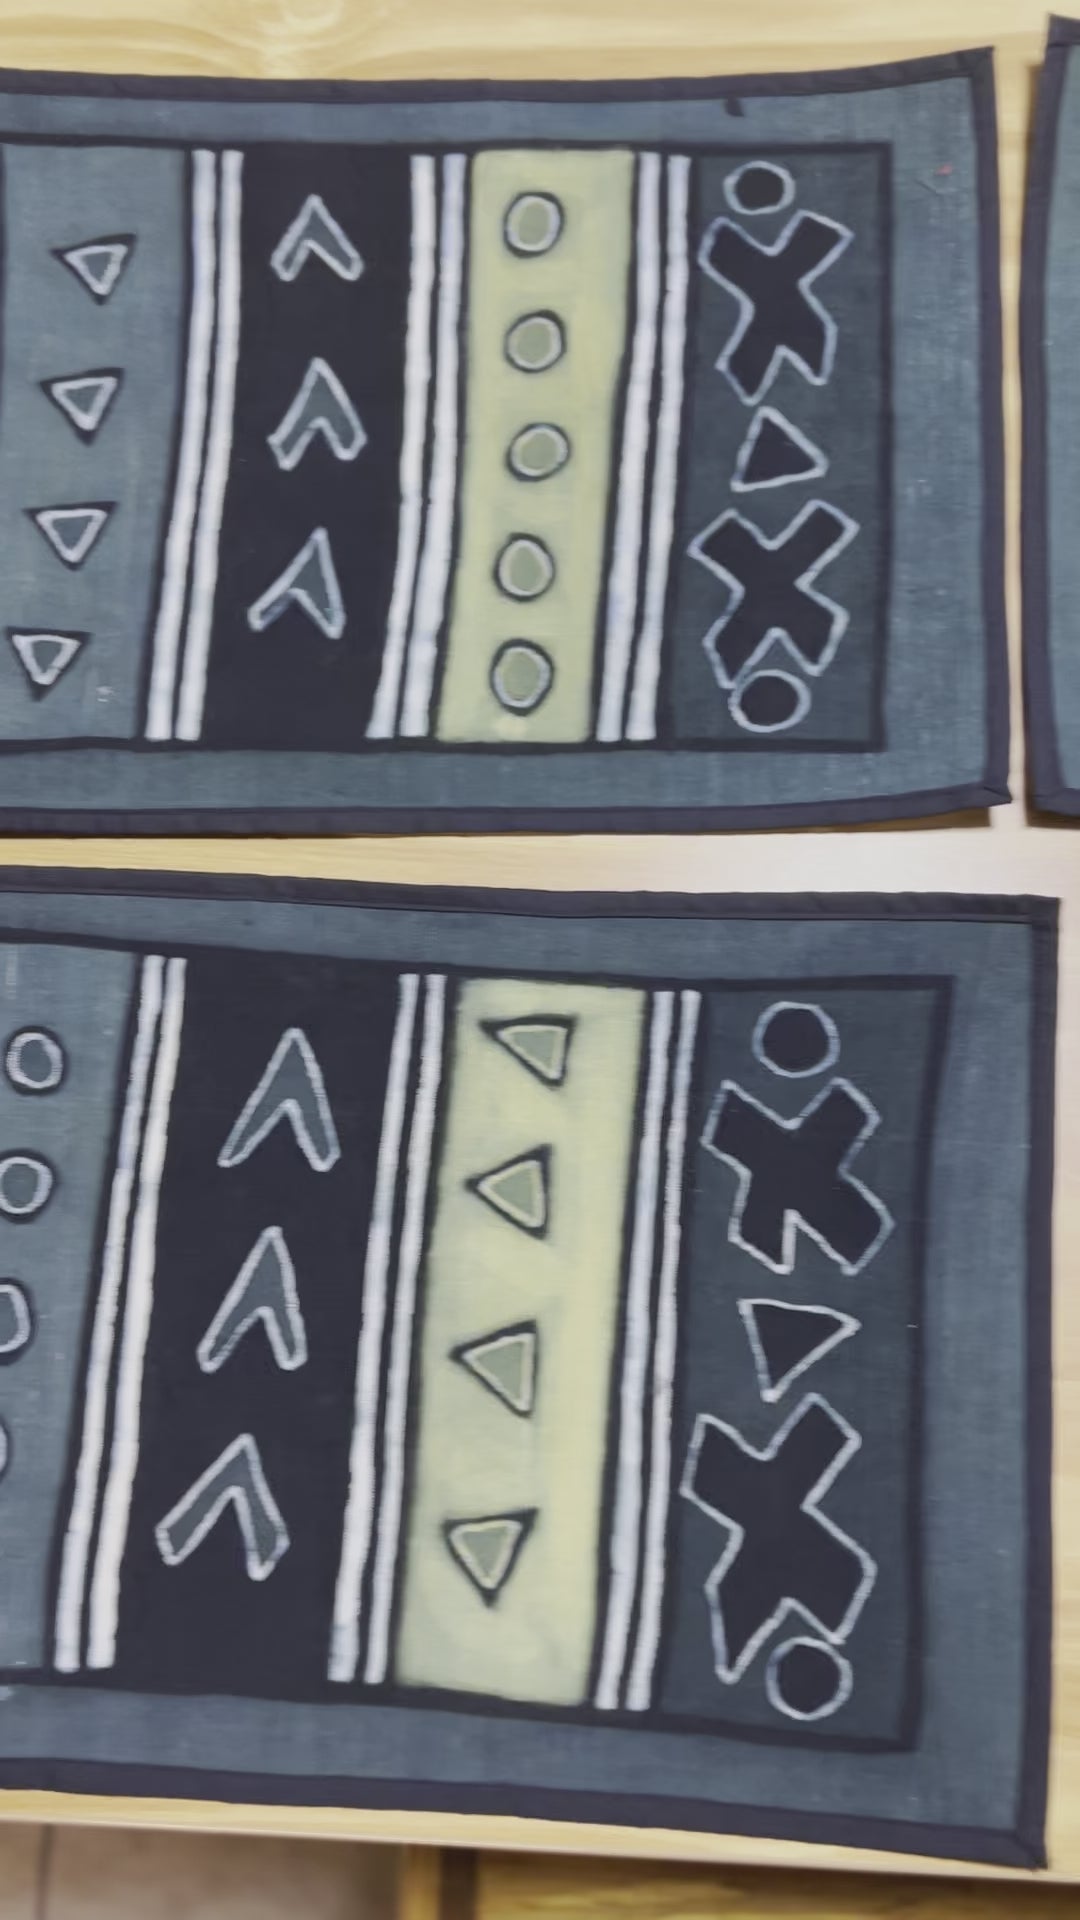 "Tradition Meets Table: Authentic Mudcloth Placemats from Mali"